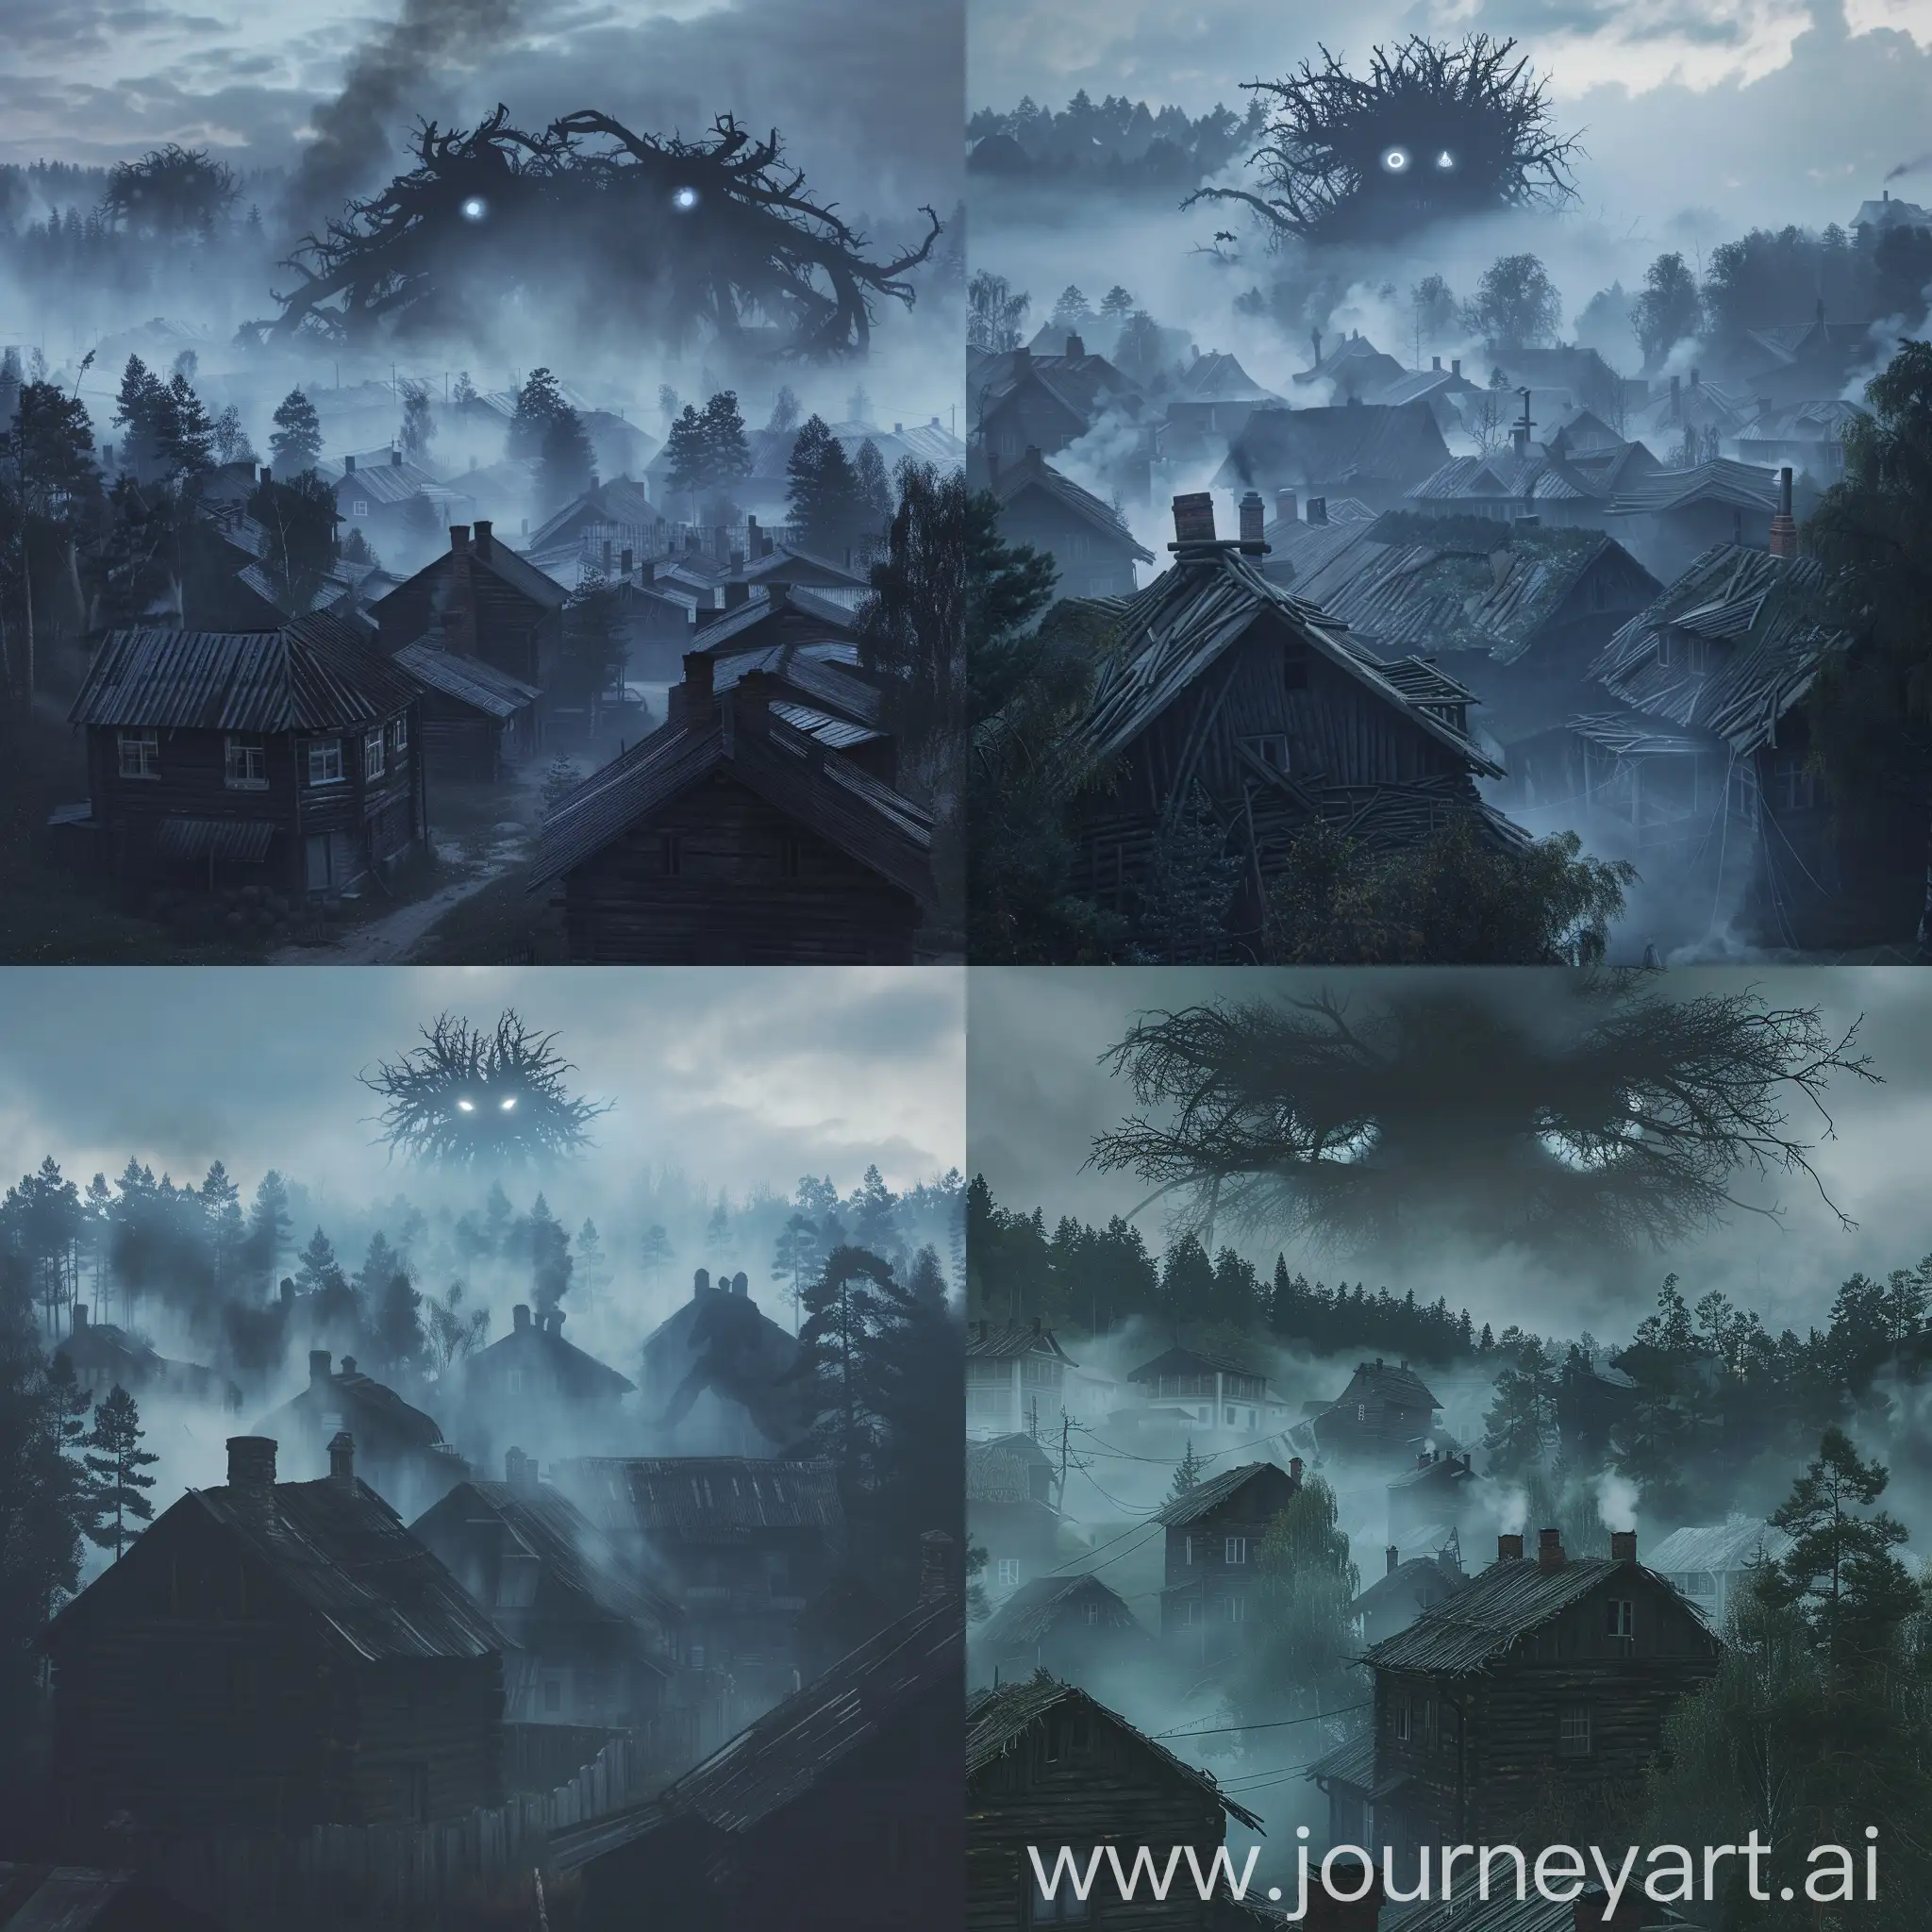 old village, wooden houses, fog, night, gloomy atmosphere, russia, forest, smoke from chimneys of houses,Over the village silhouettes creatures in the mist, a creature made of branches, eyes glow,  hyperrealism, 8K image quality, ultra detail